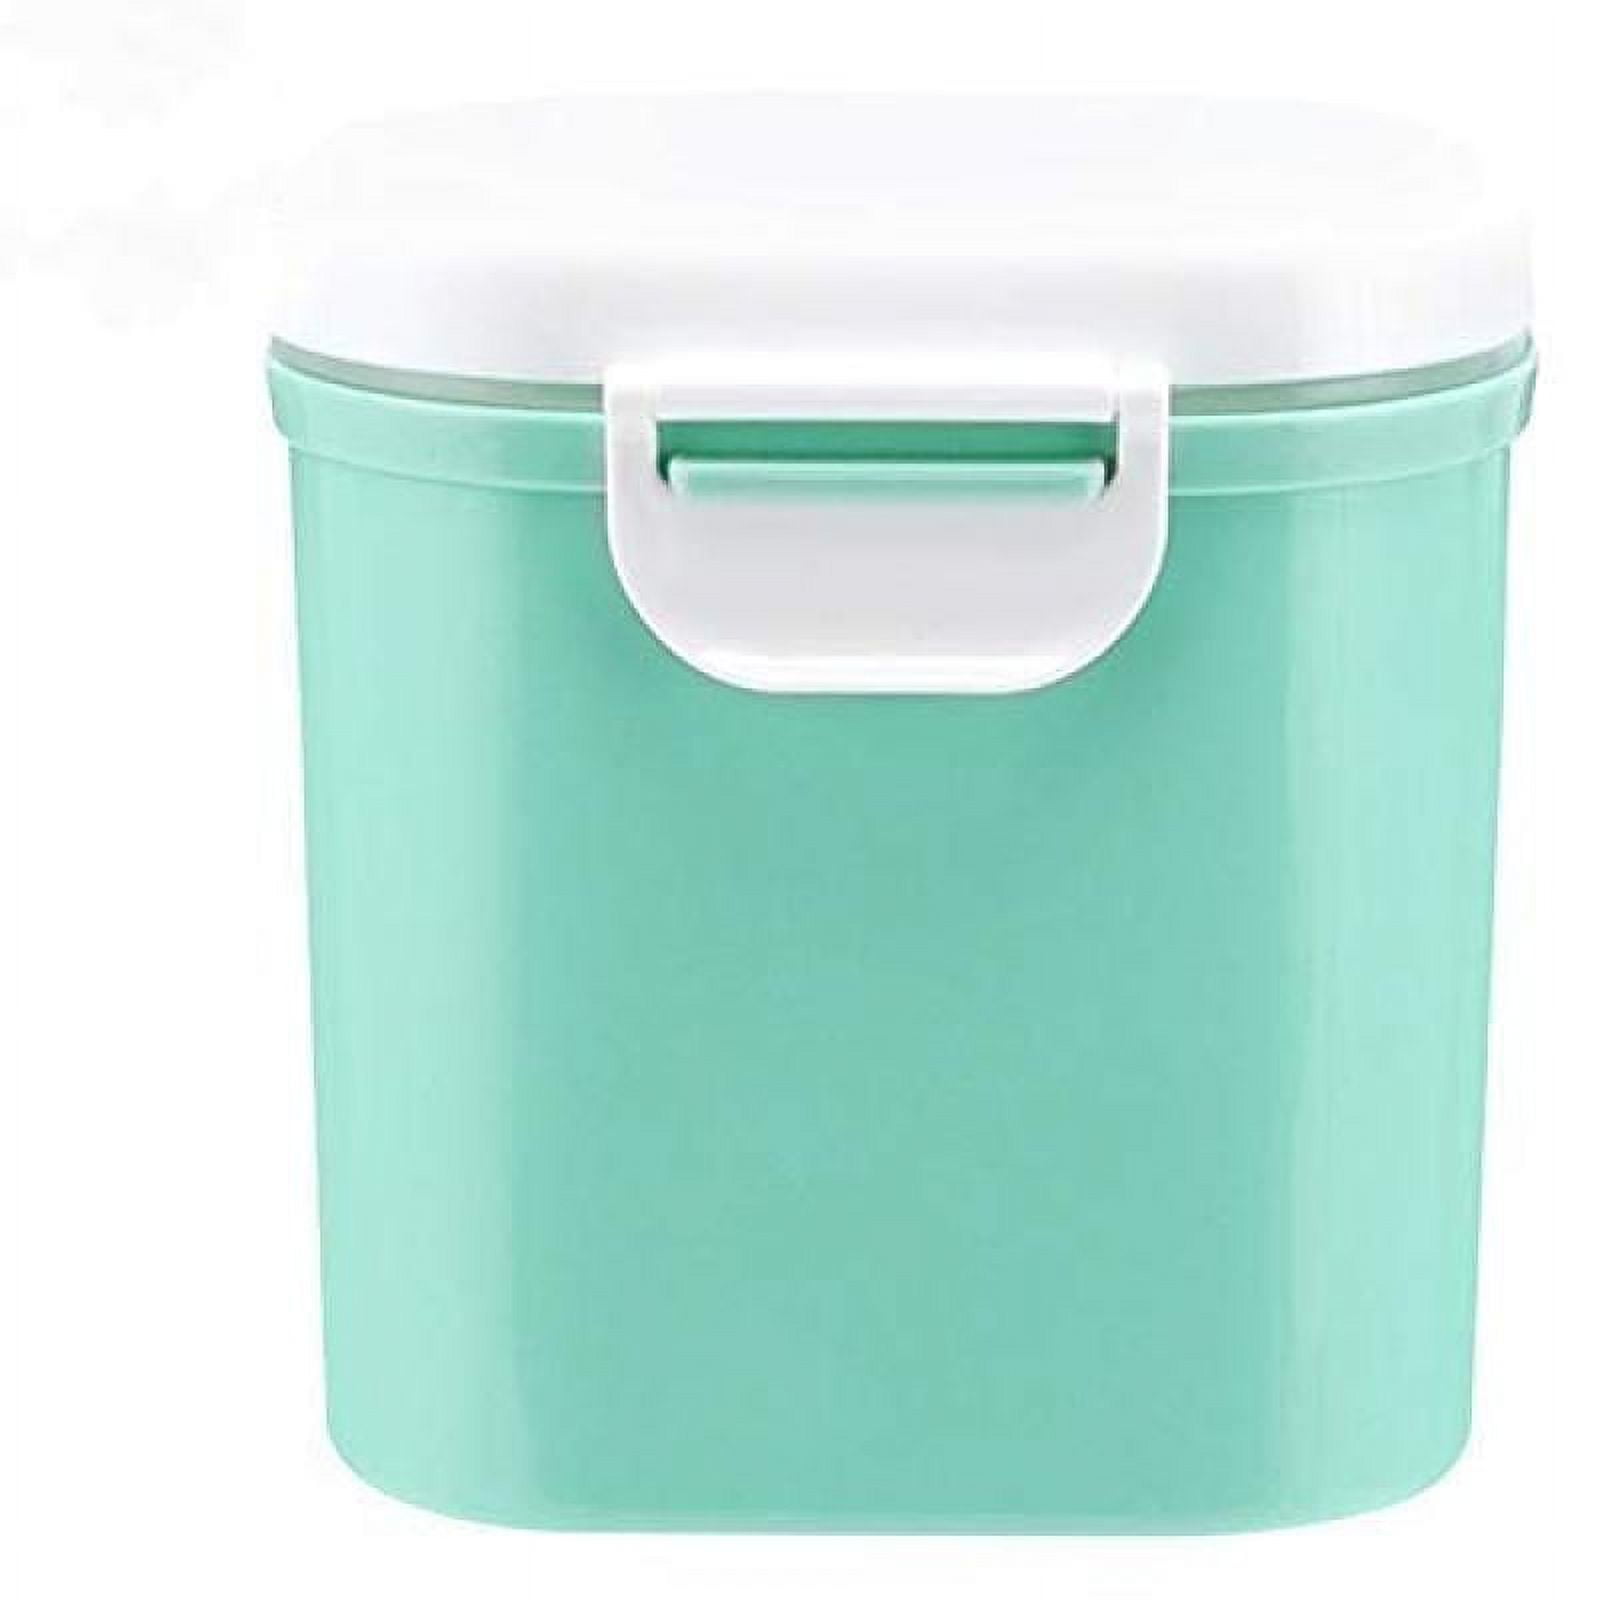  FRCOLOR 2 pcs formula storage container dispenser container  formula travel container milk powder container travel snack container  formula dispenser sealable containers candy baby food : Baby